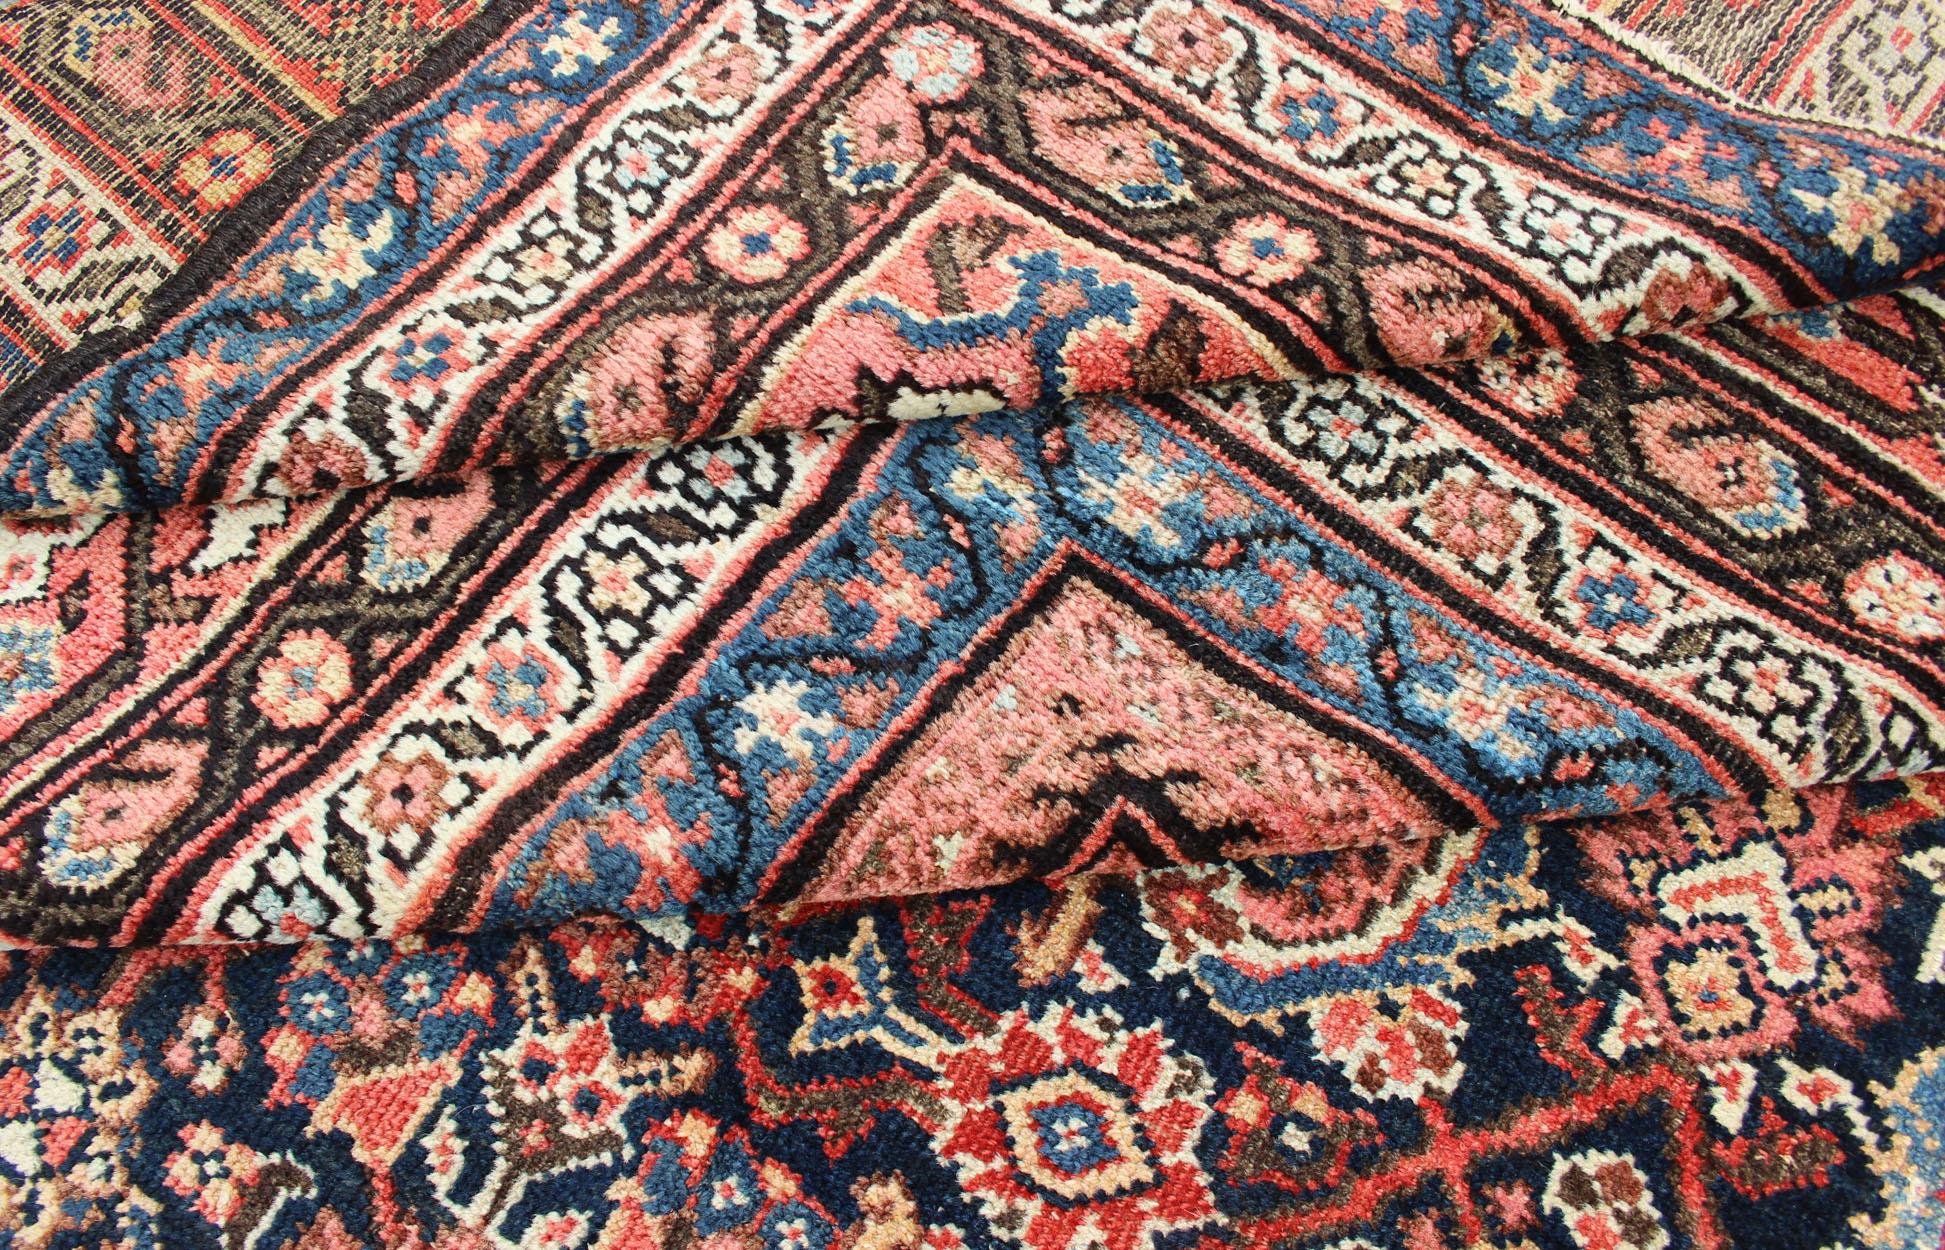 Wool Very Long Persian Sultanabad Rug with Herati Design in Dark Blue and Red